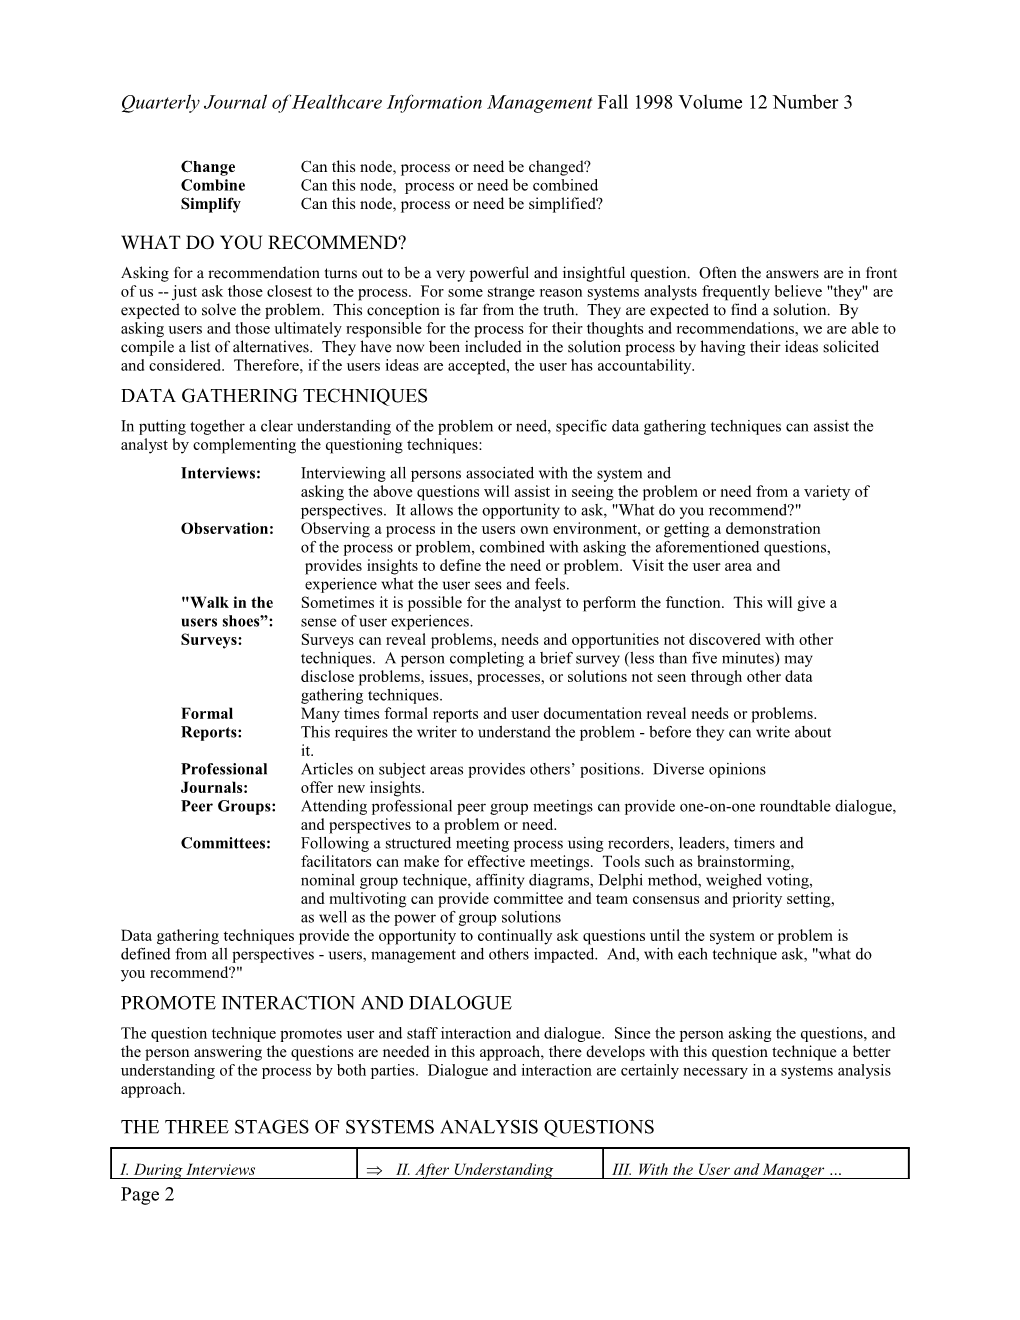 Systems Analyst Article